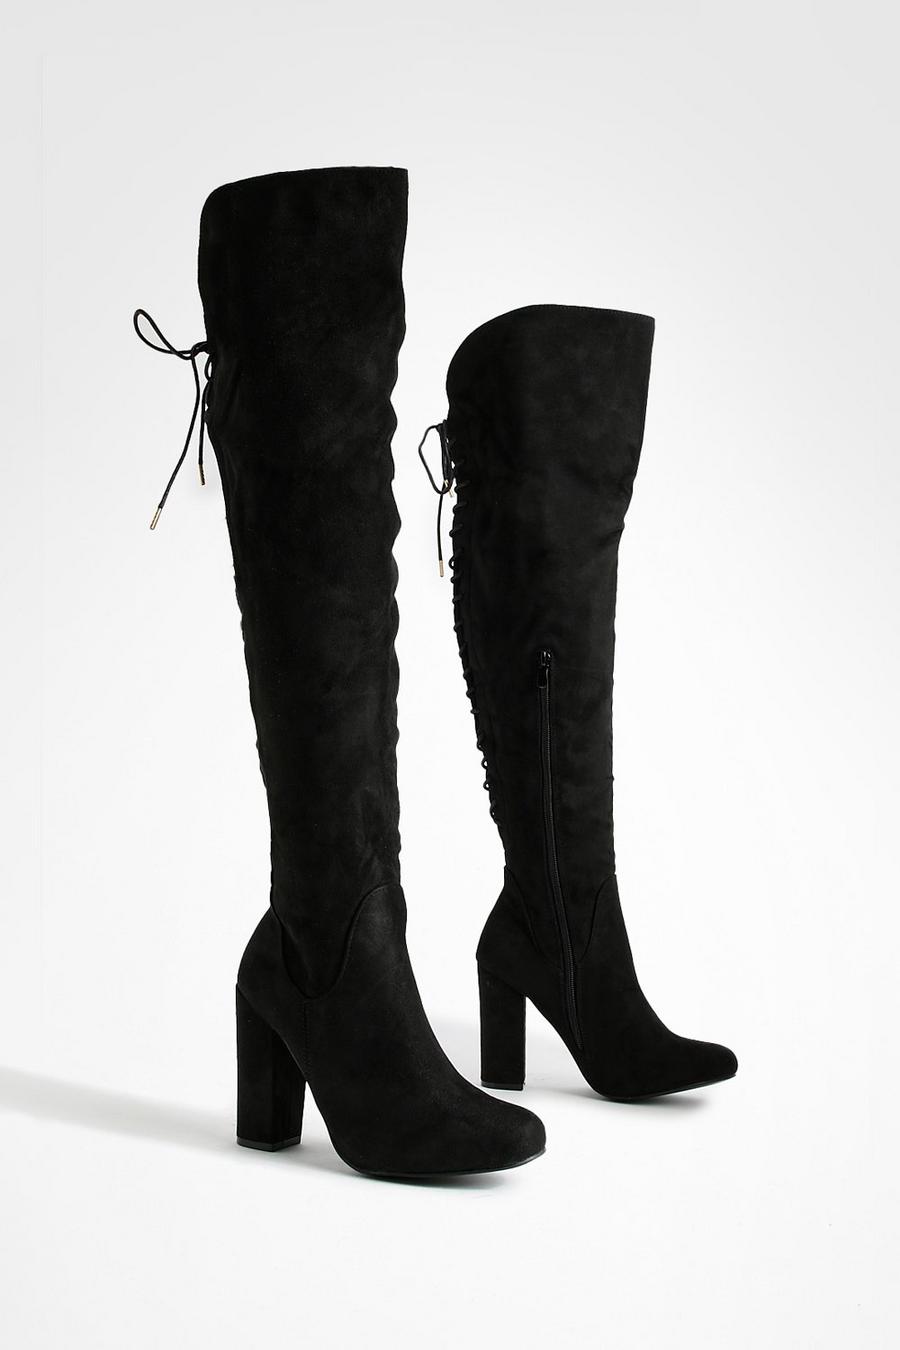 Black Lace Back Block Heel Over The Knee High Boots